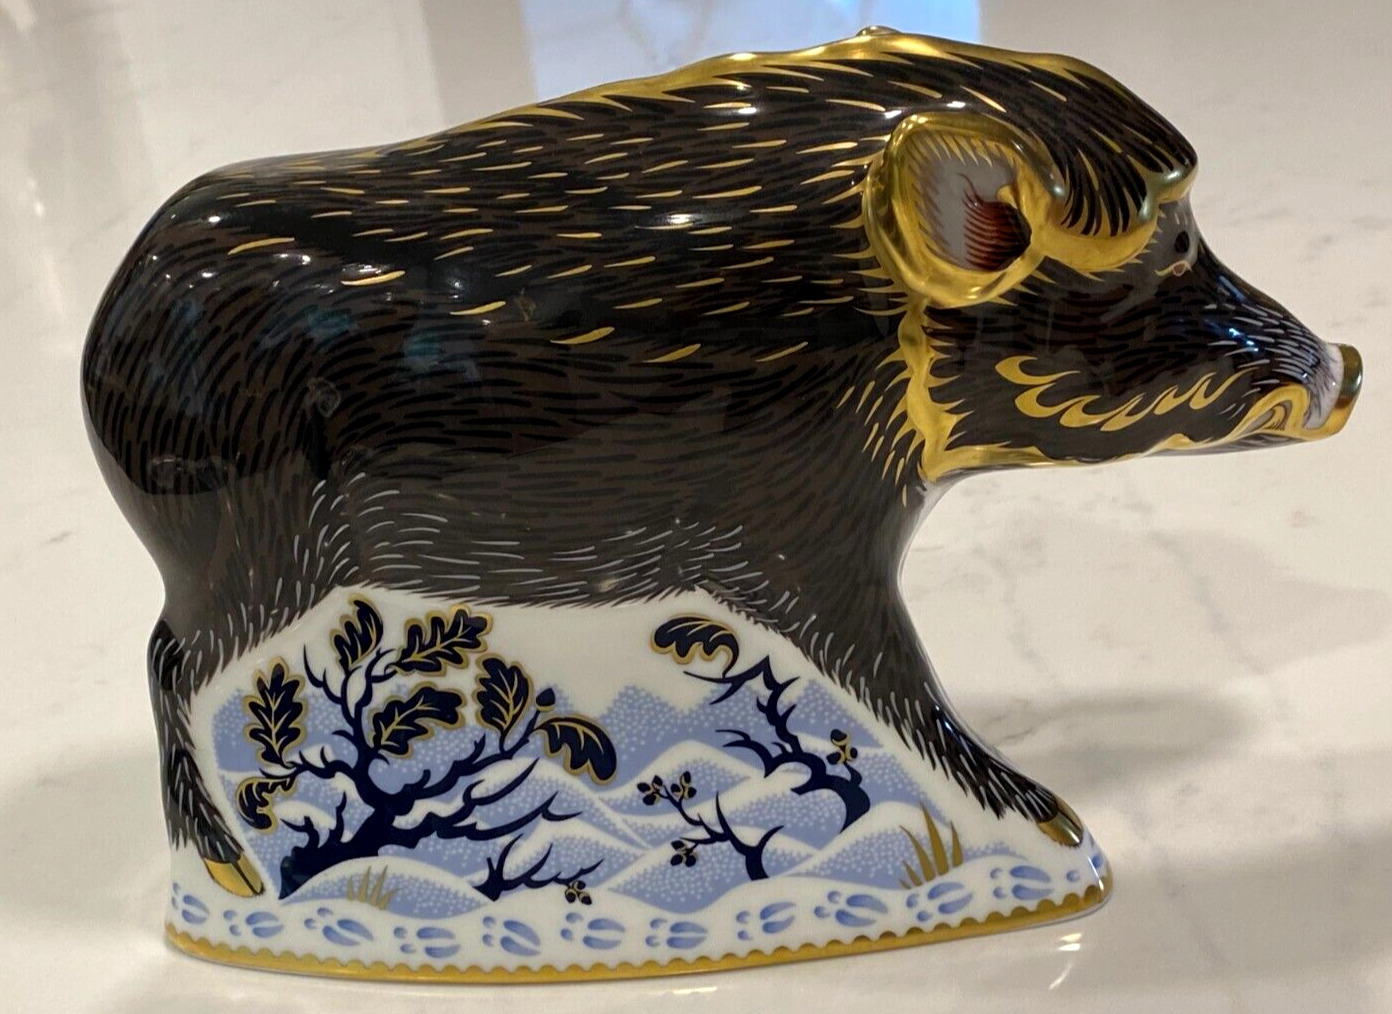 RARE ROYAL CROWN DERBY ENGLISH BONE CHINA 2008 LARGE THE WILD BOAR PAPERWEIGHT